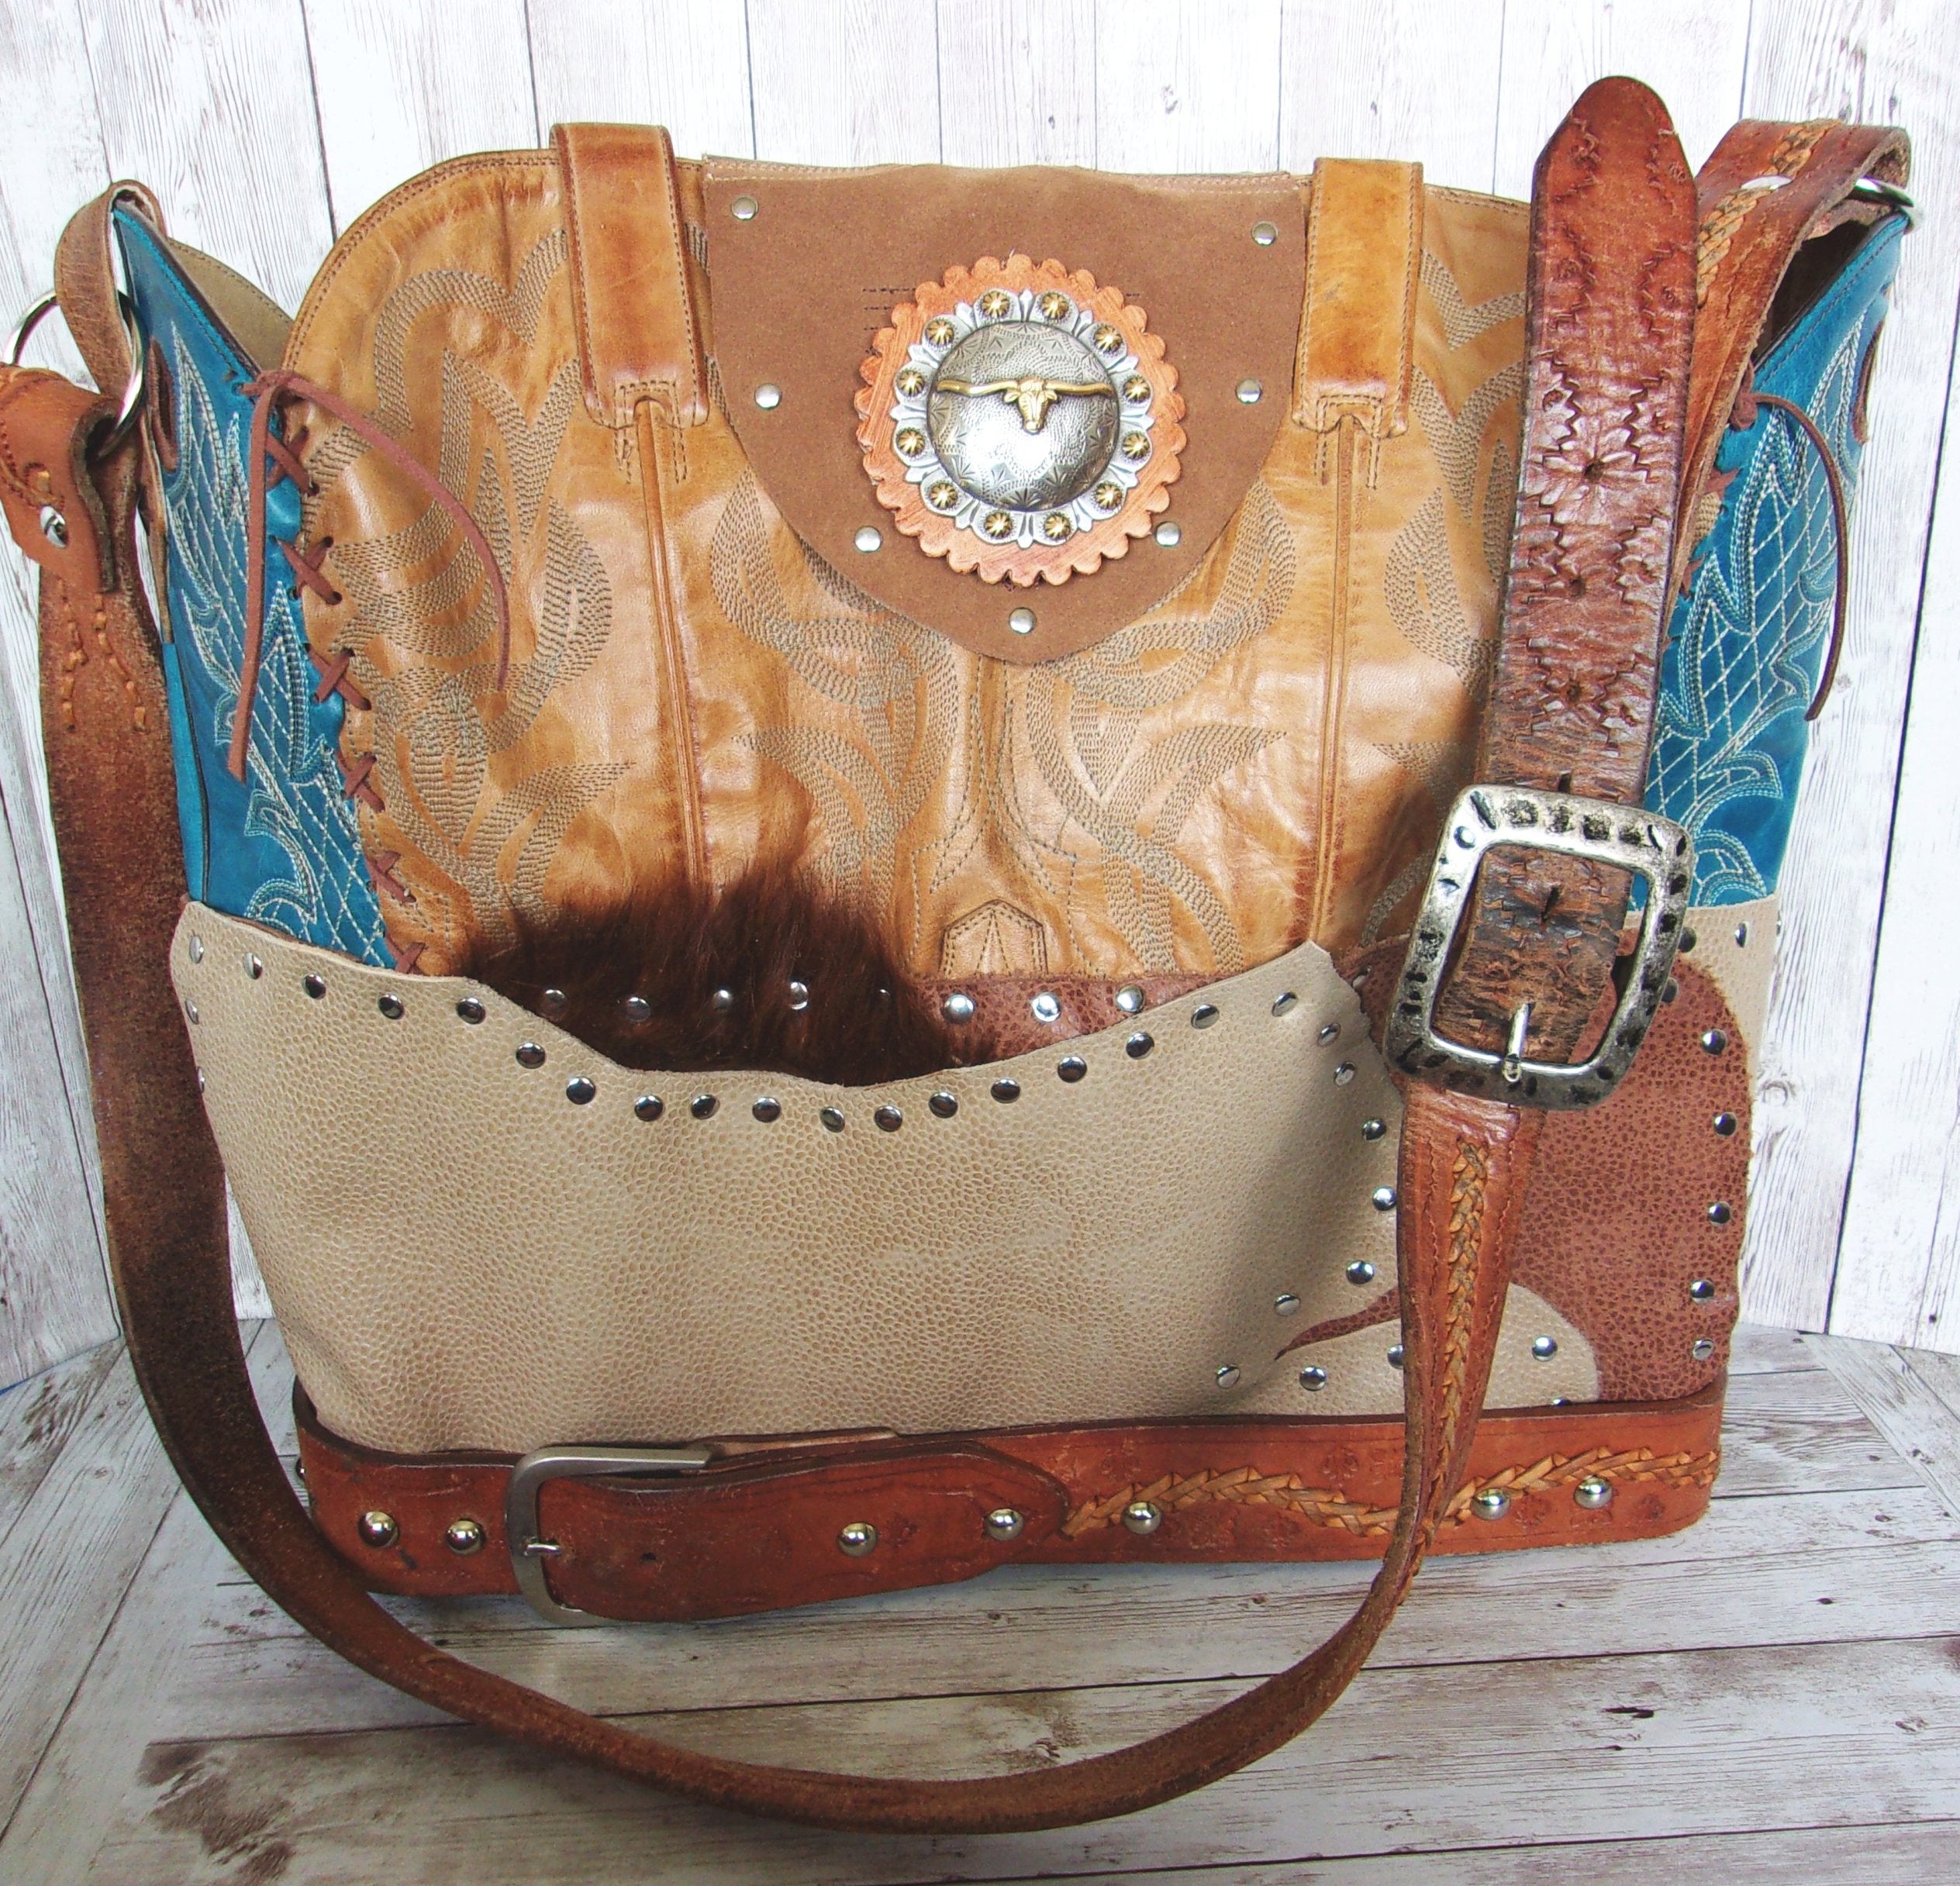 Western Laptop Tote - Extra Large Cowboy Boot Purse - Western Travel Bag LT38 cowboy boot purses, western fringe purse, handmade leather purses, boot purse, handmade western purse, custom leather handbags Chris Thompson Bags